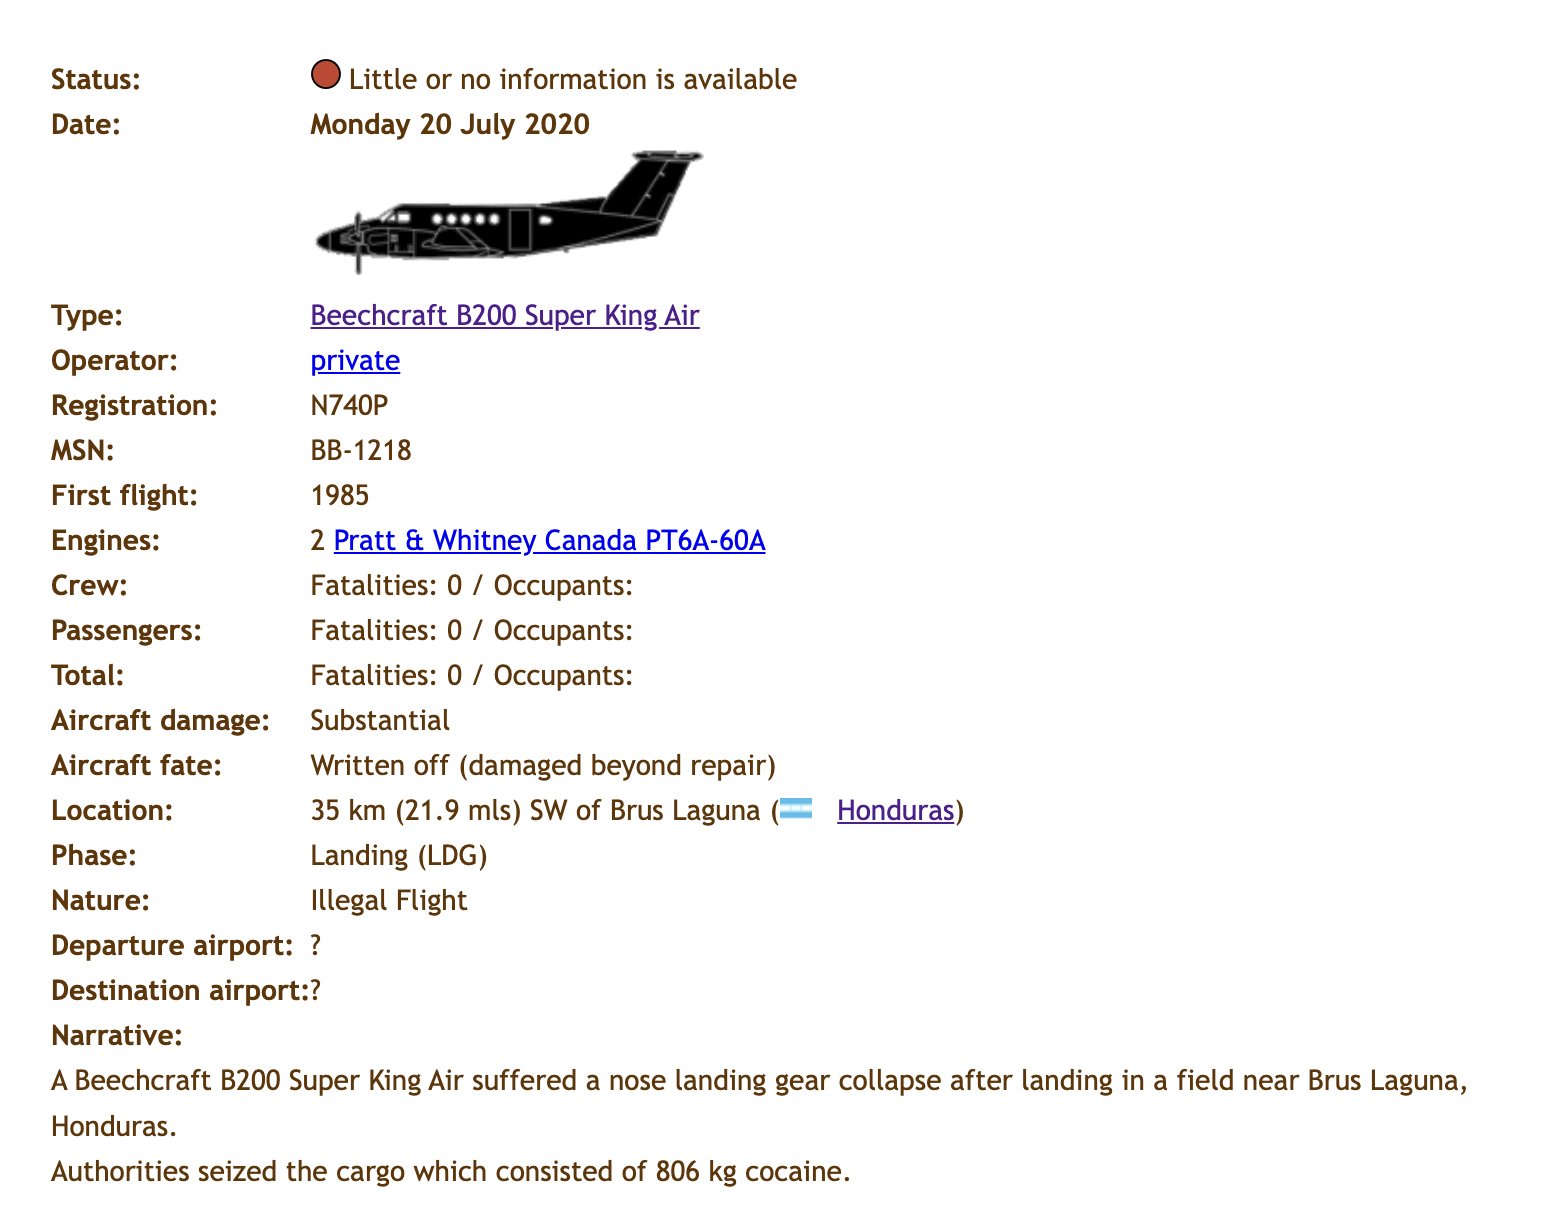  Documents identifying the plane carrying 806 kg of cocaine. 